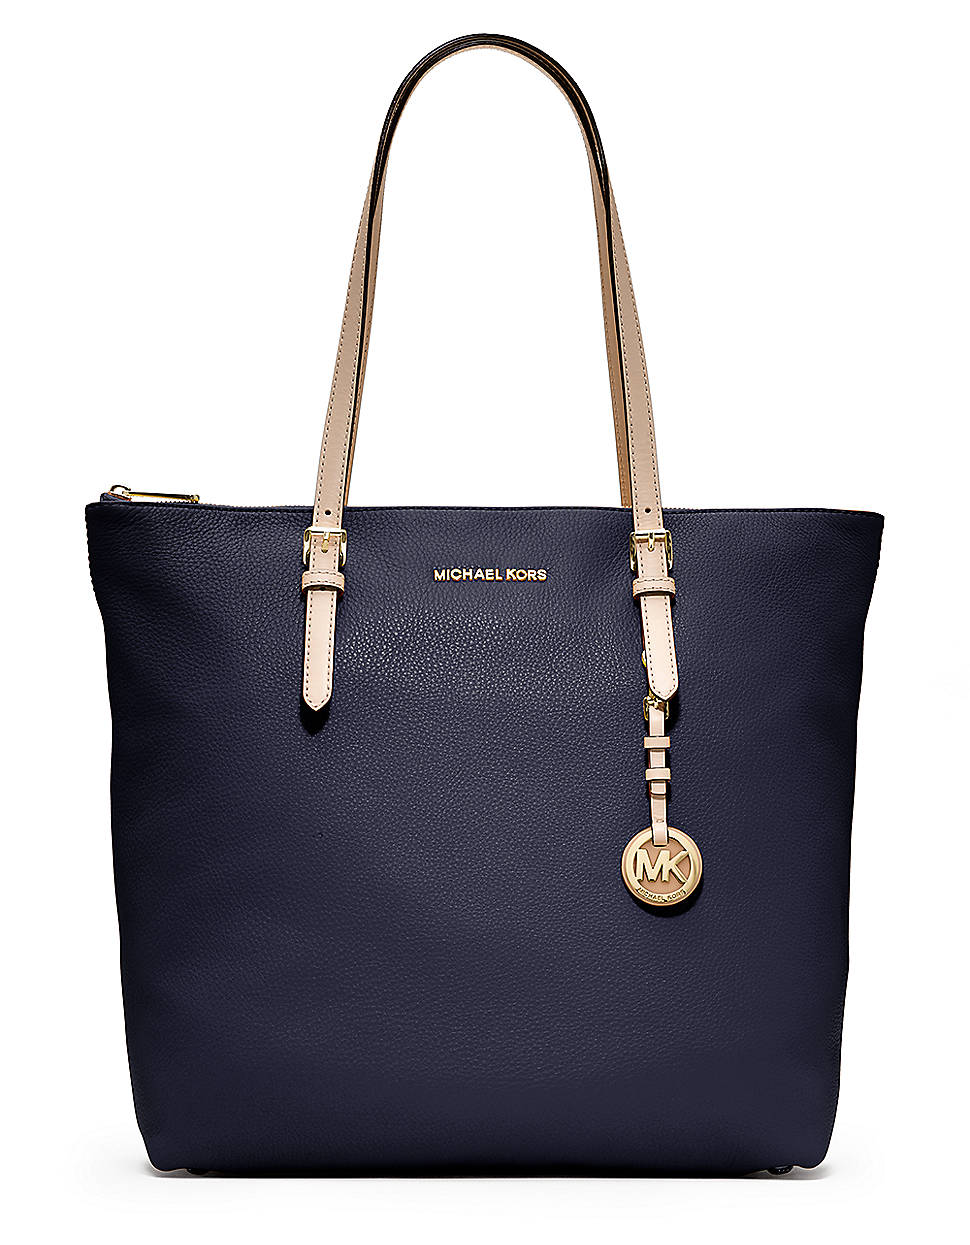 Michael Michael Kors Jet Set Large Leather Tote Bag in Blue (navy) | Lyst